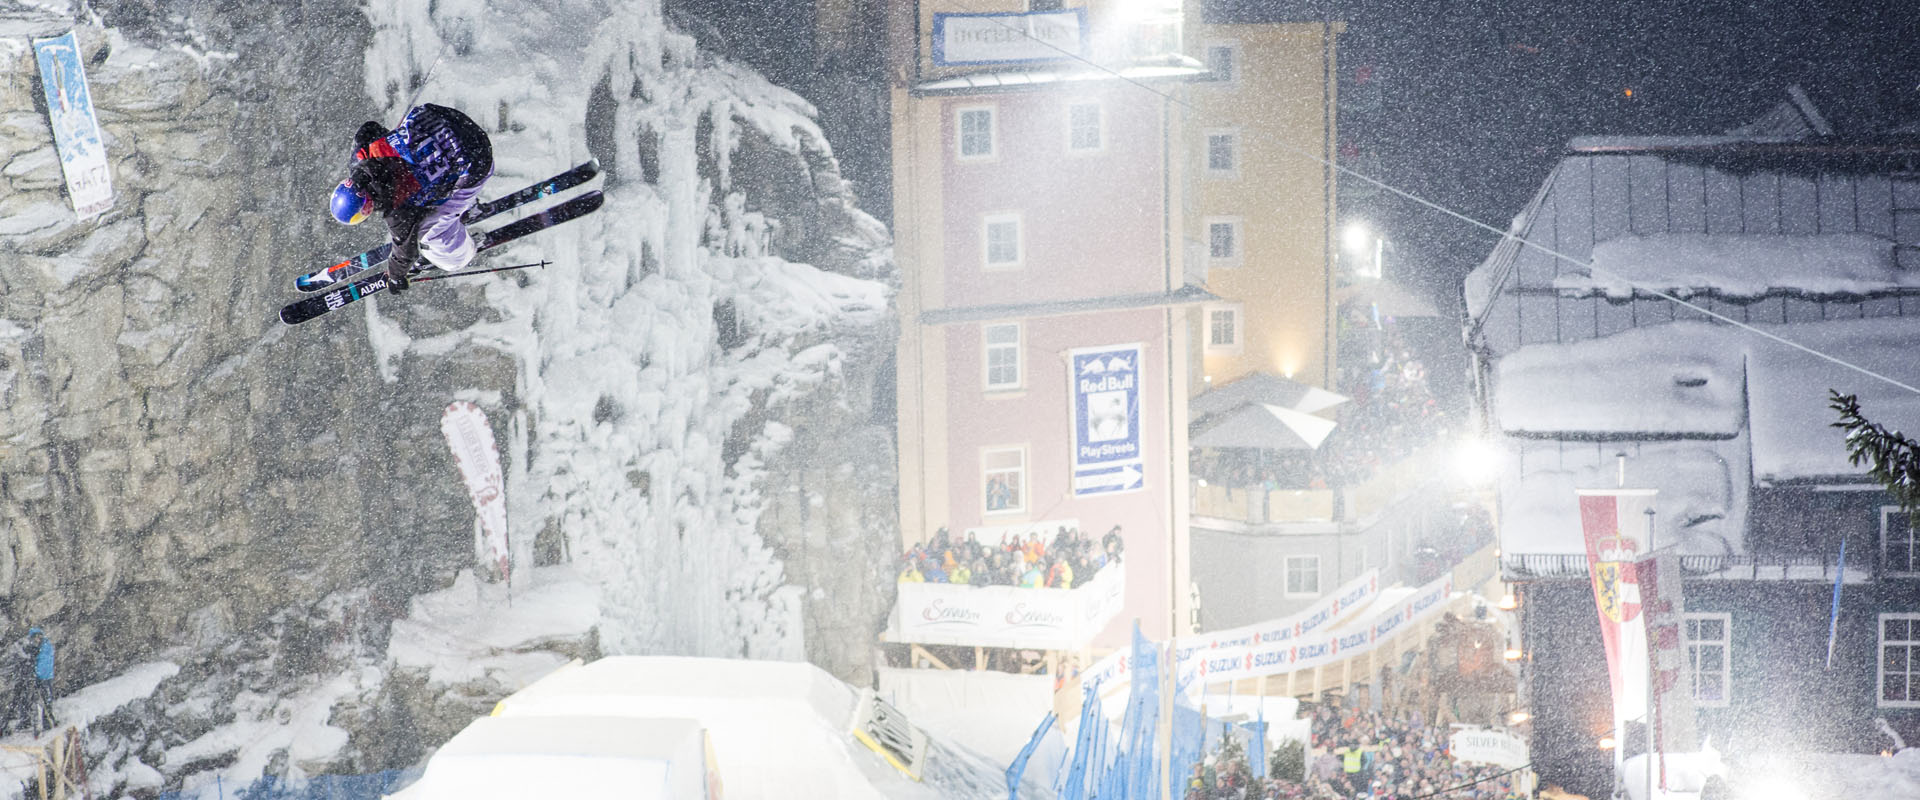 red bull playstreets - freeski event in bad gastein